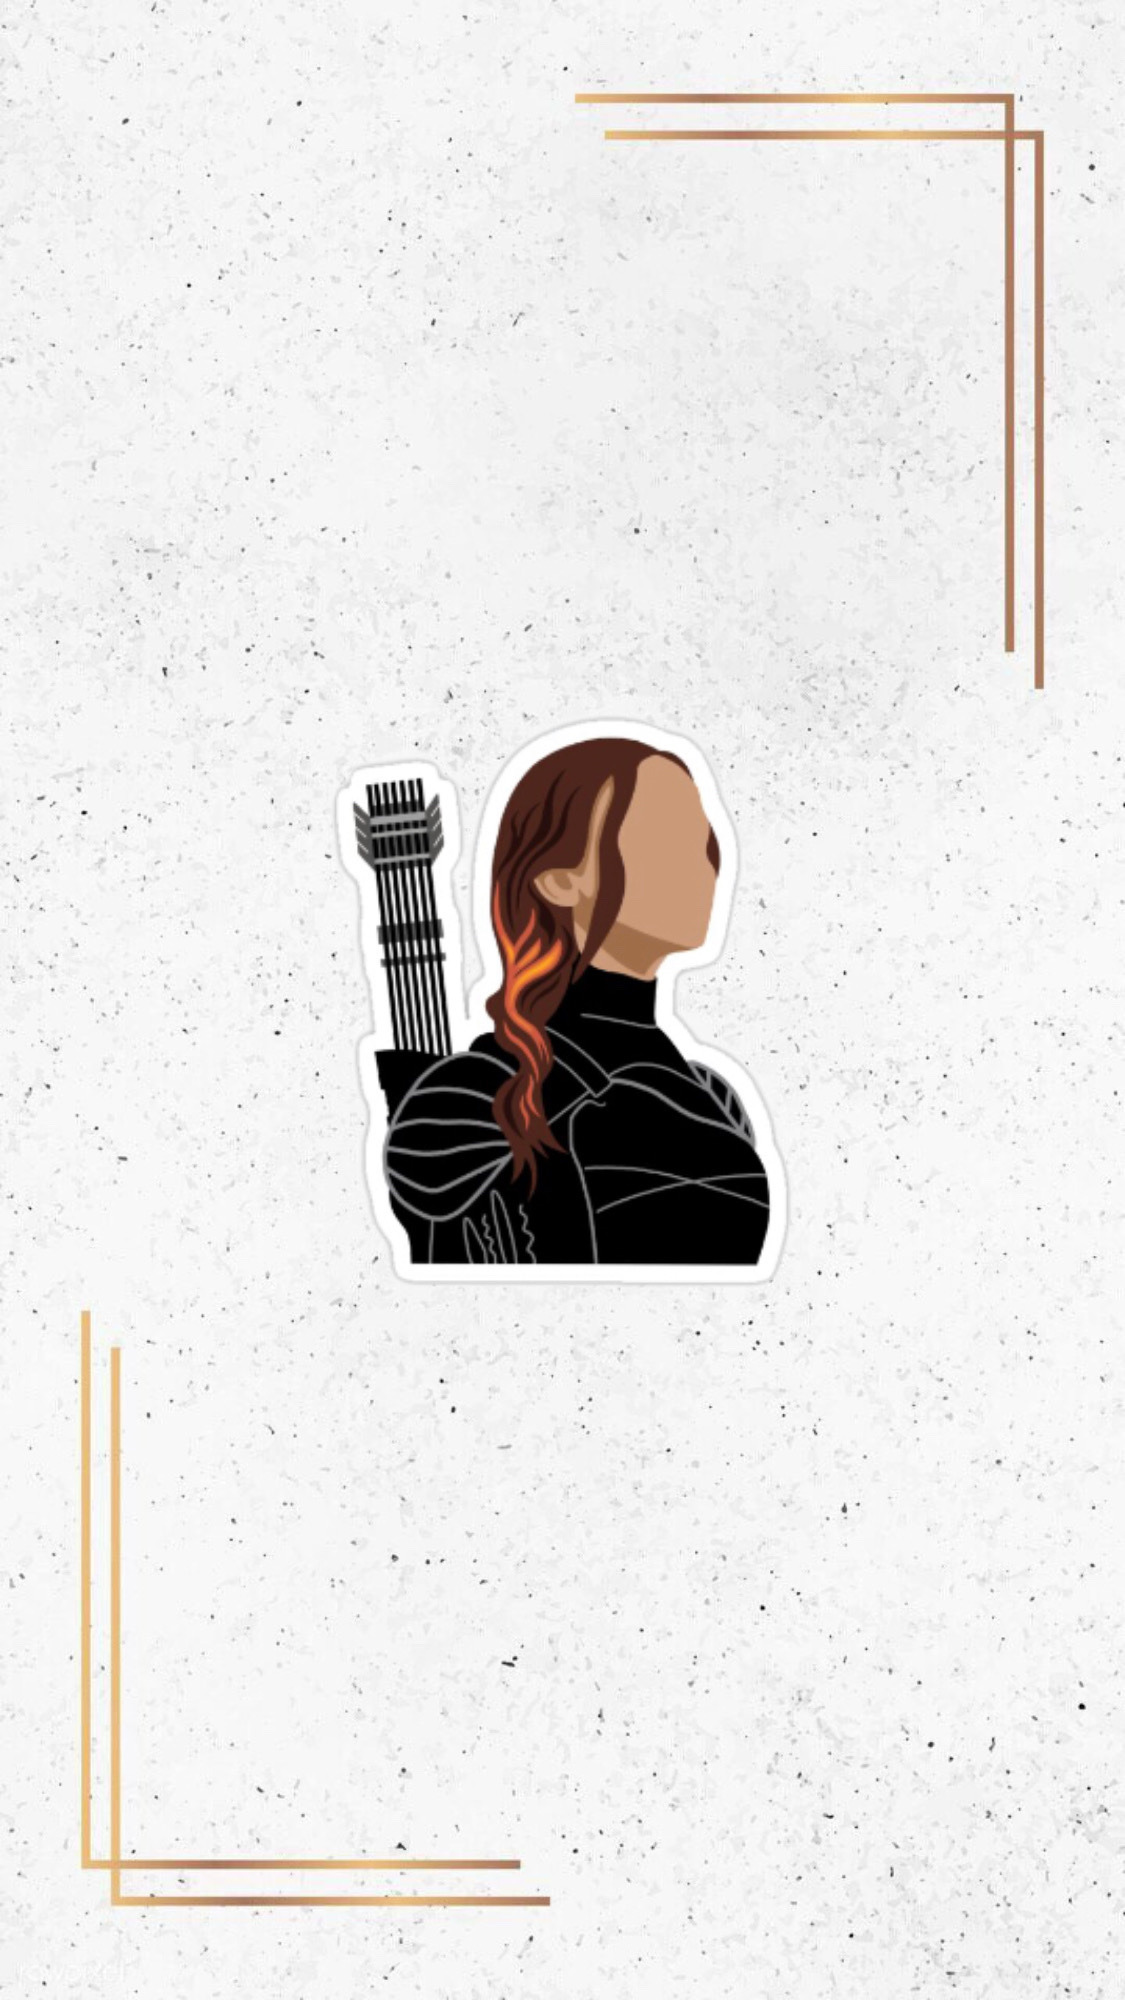 The Hunger Games: Mockingjay - Part 1 Phone Wallpaper - Mobile Abyss